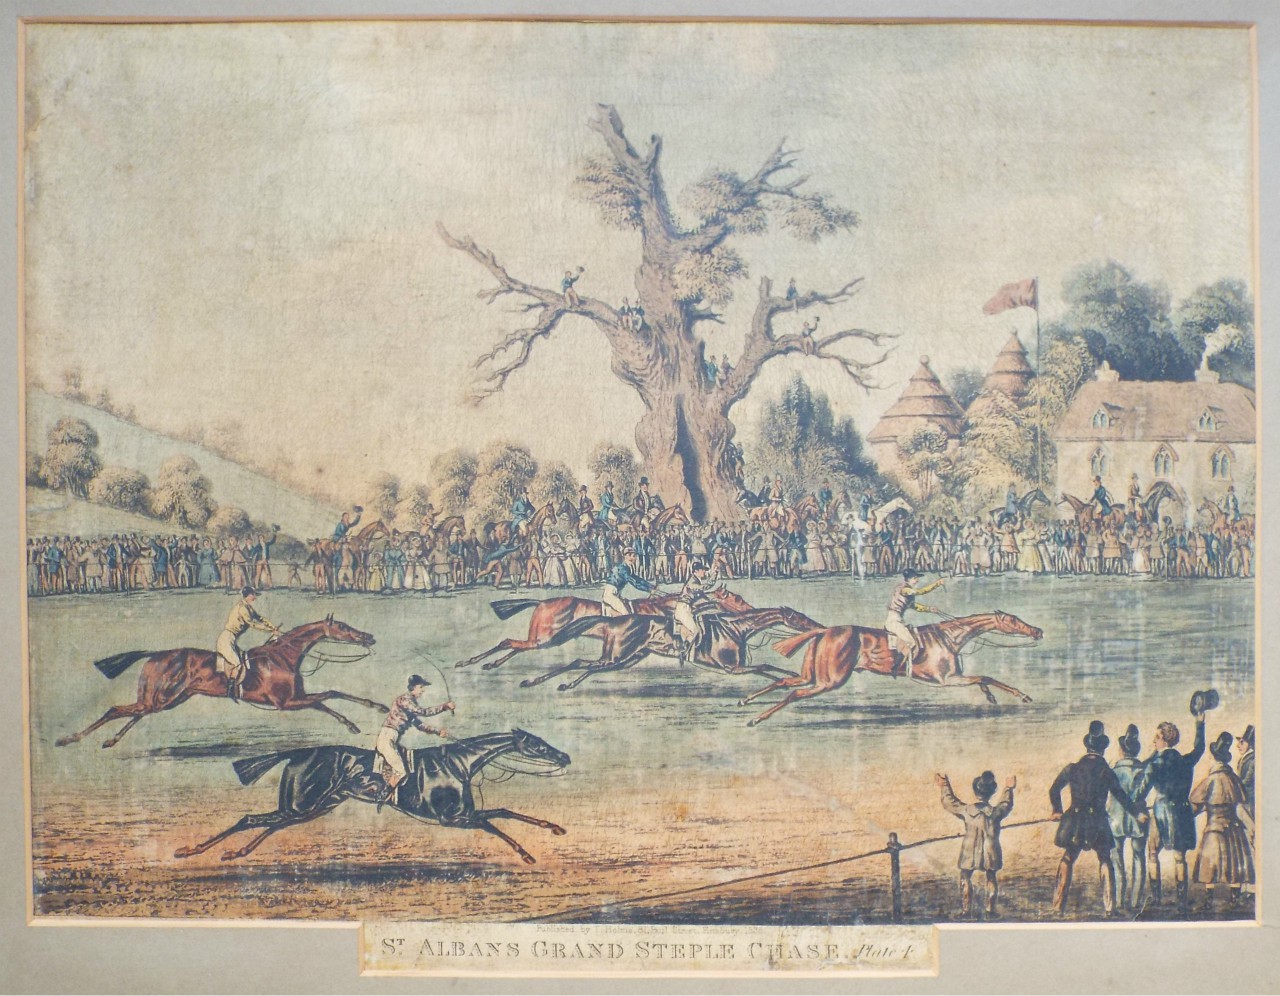 Aquatint - St. Albans Grand Steeple Chase. Plate 4.